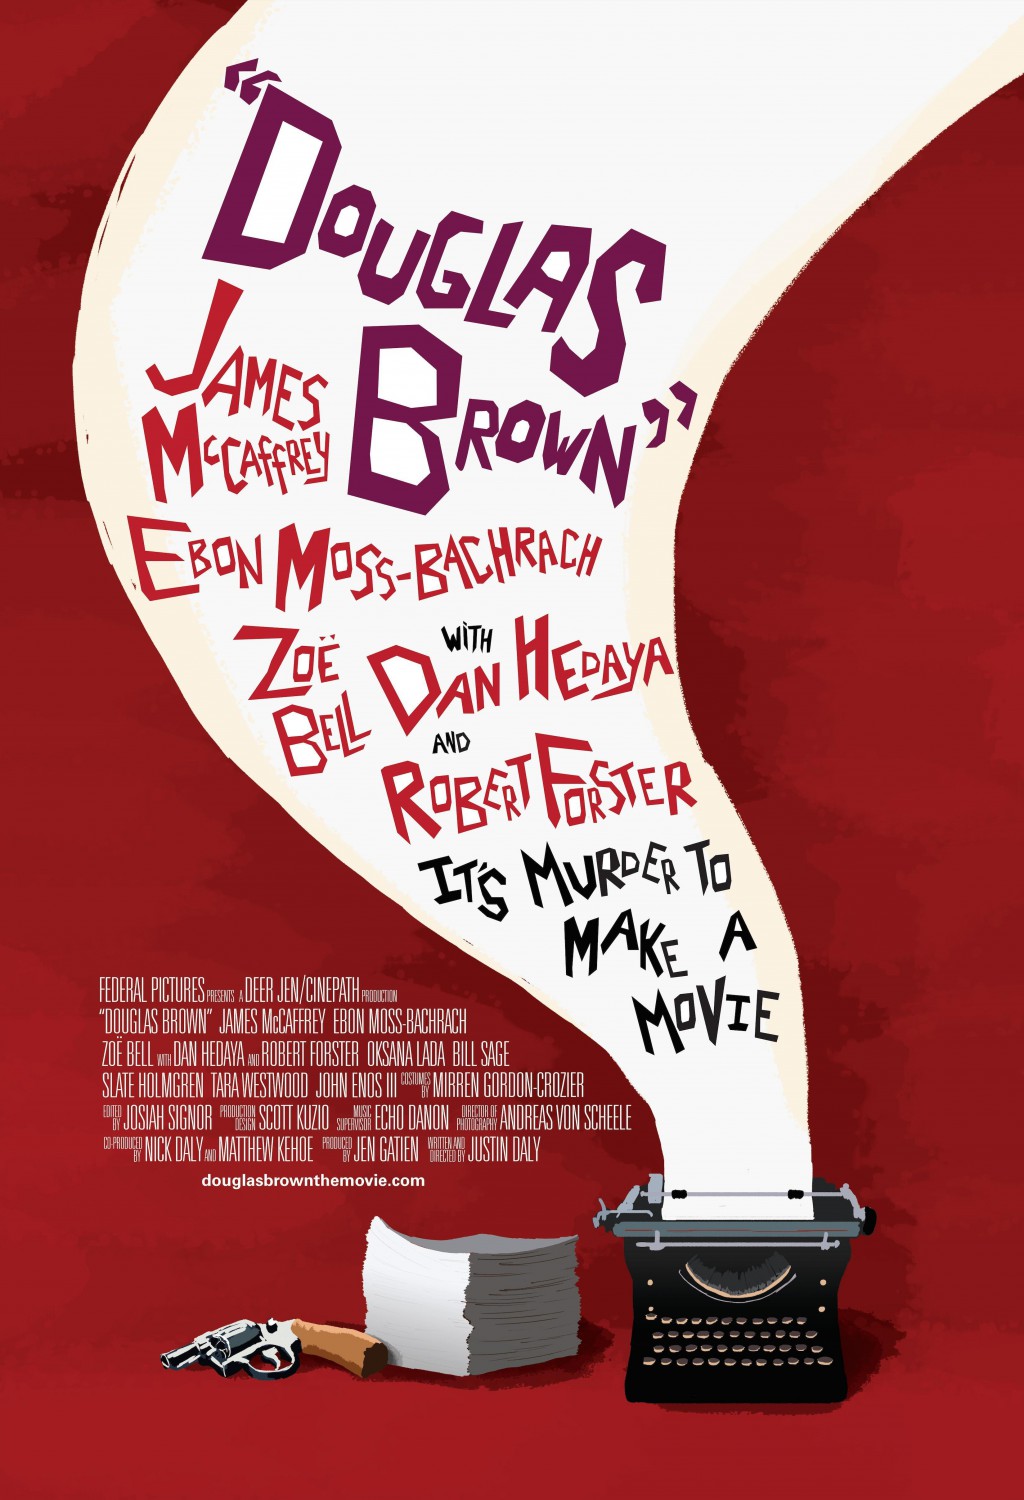 Extra Large Movie Poster Image for Douglas Brown 